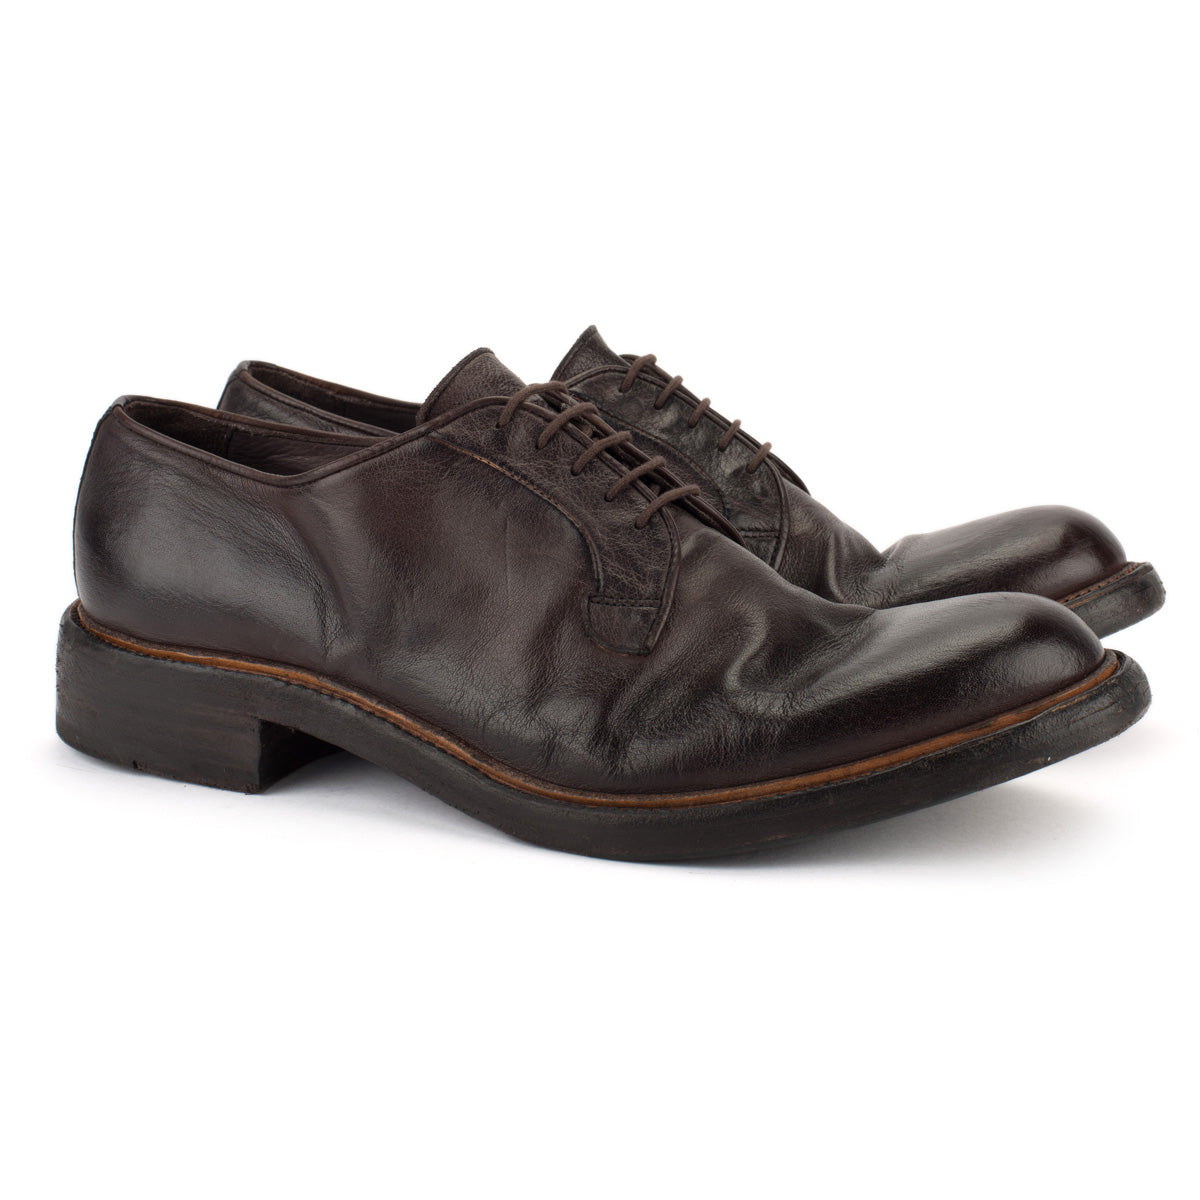 Ettore 1186 brown washed